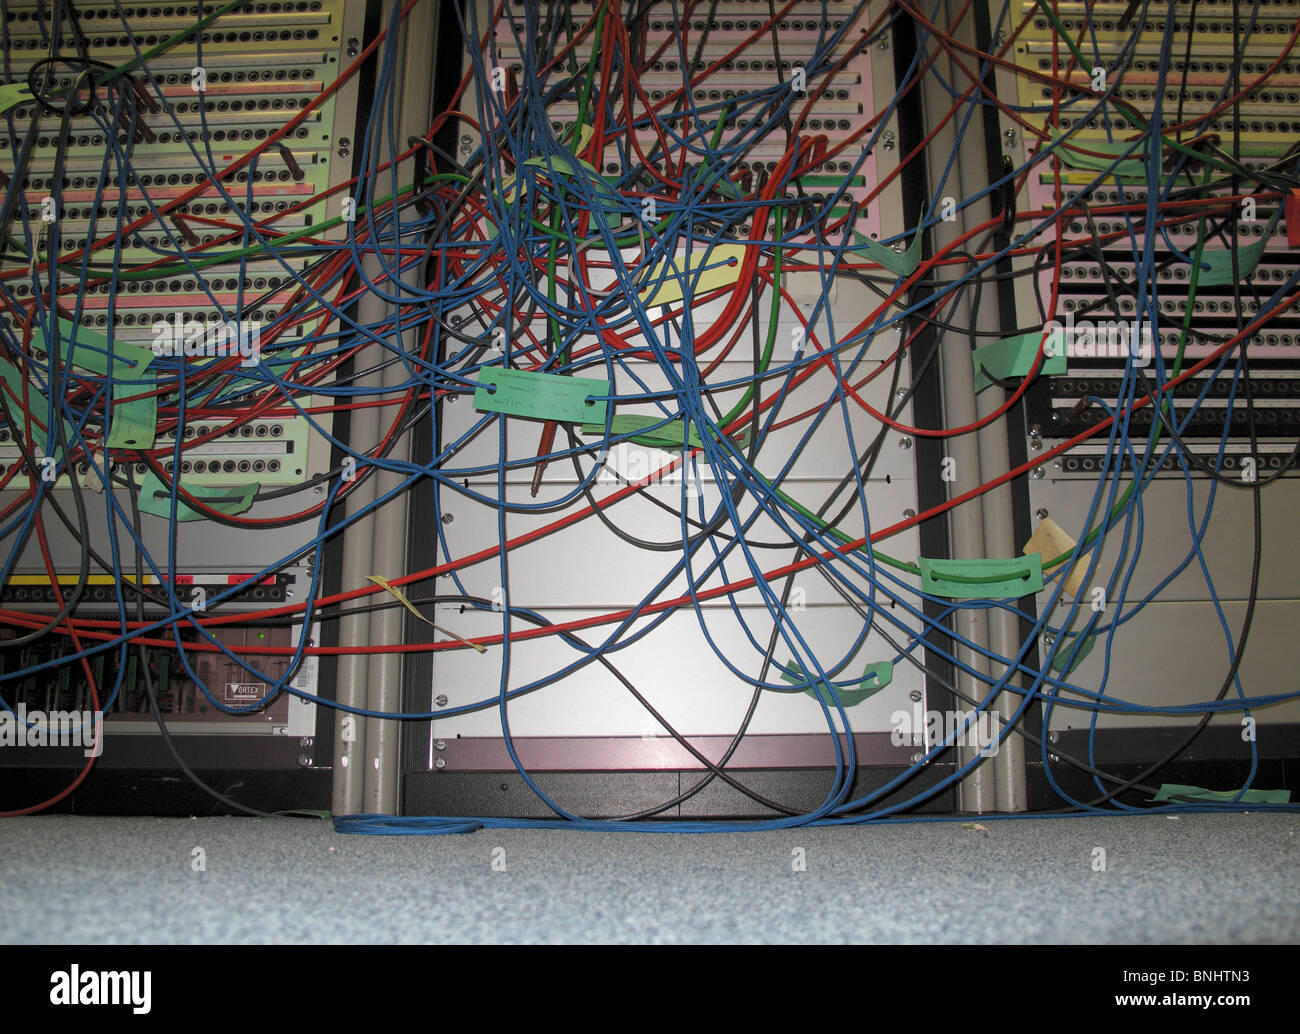 Mass of red and blue wires coming from rack mounted servers Stock Photo